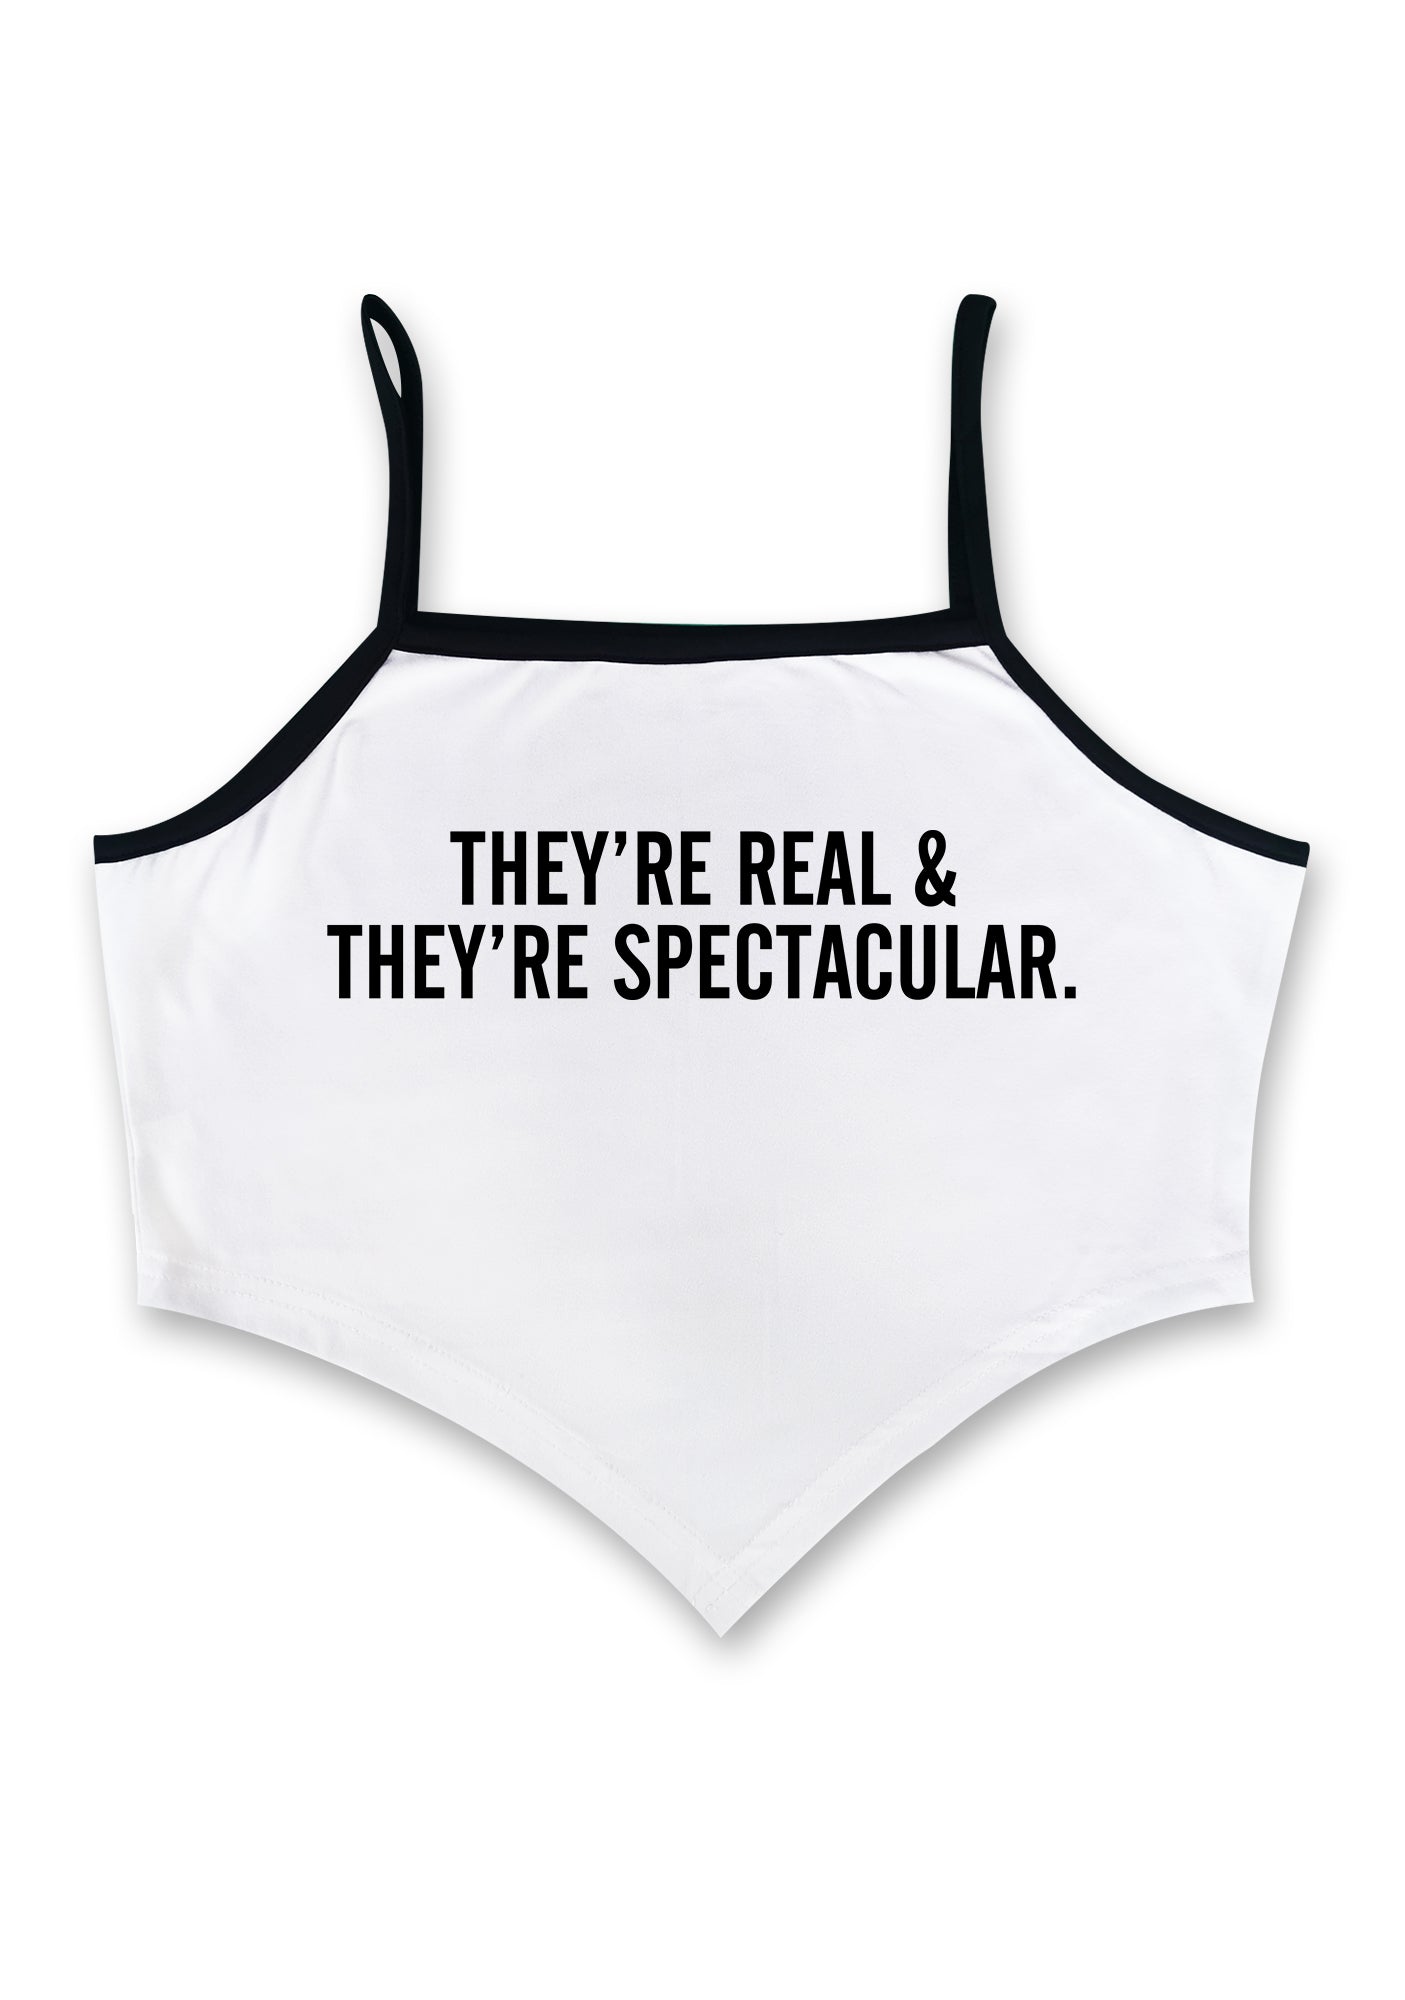 They Are Real&Spectacular Bandana Crop Tank